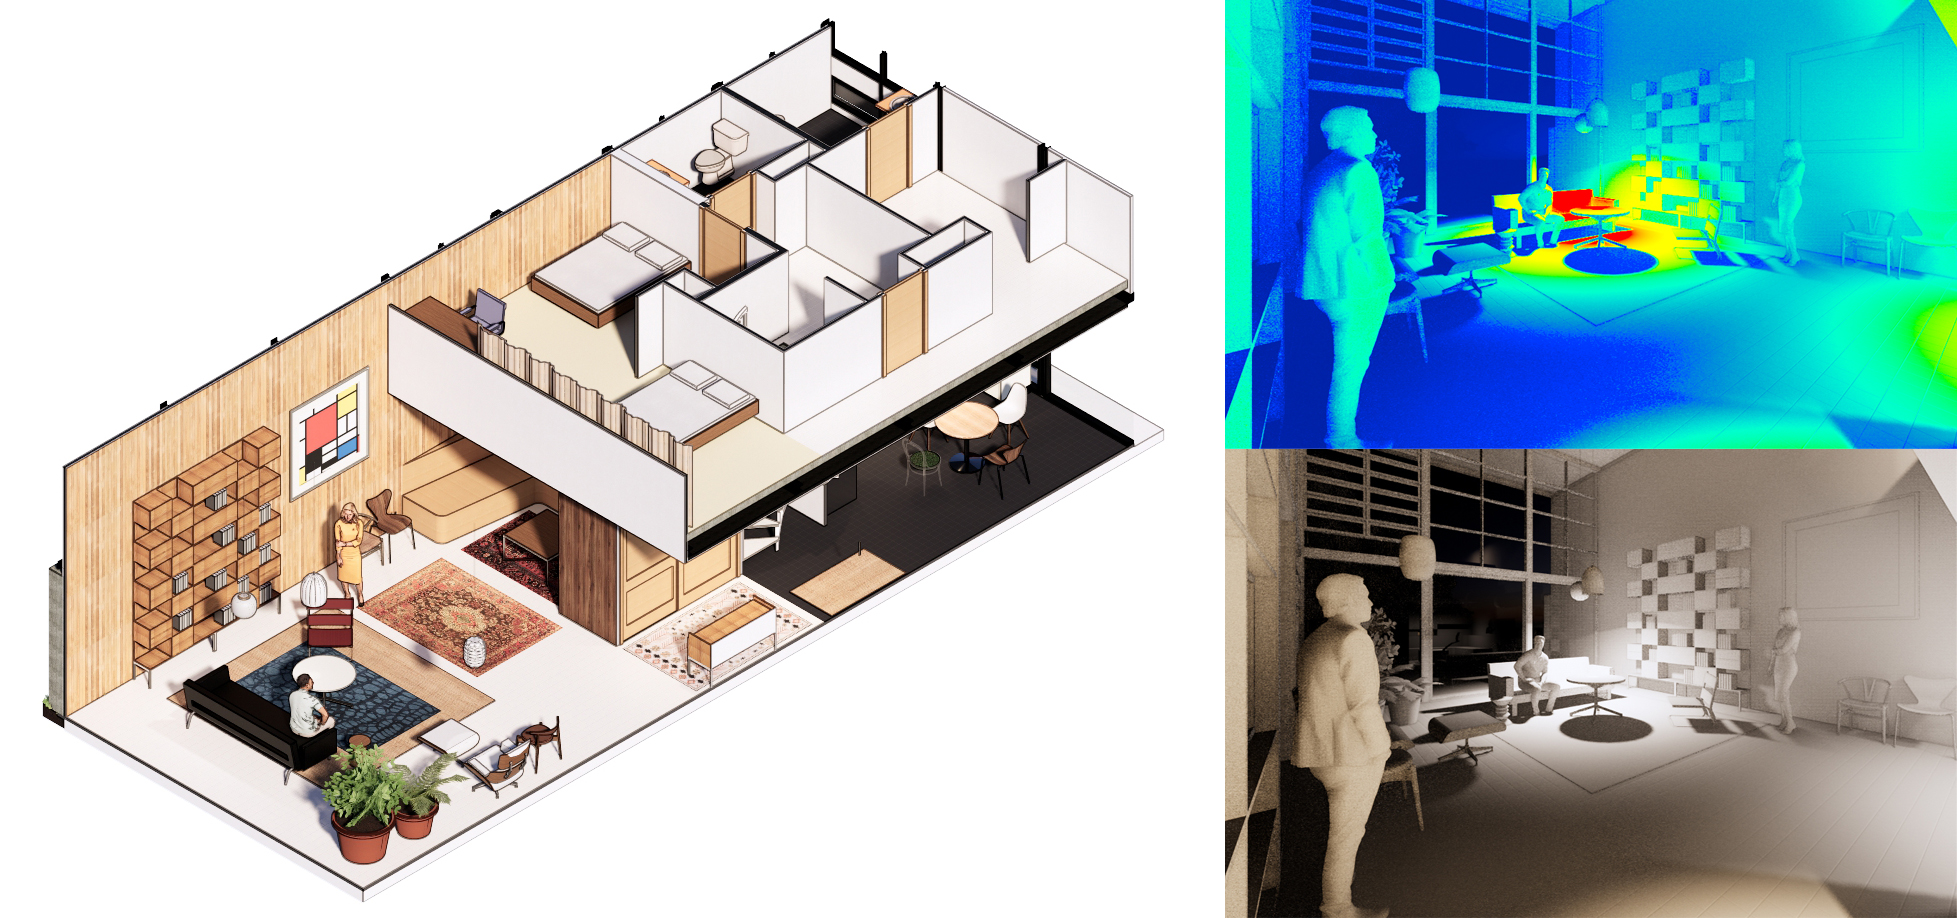 It shows the session highlight presenting the rendered isometric view, a white model, and a light analysis render. This is the expected result at the end of this lecture.